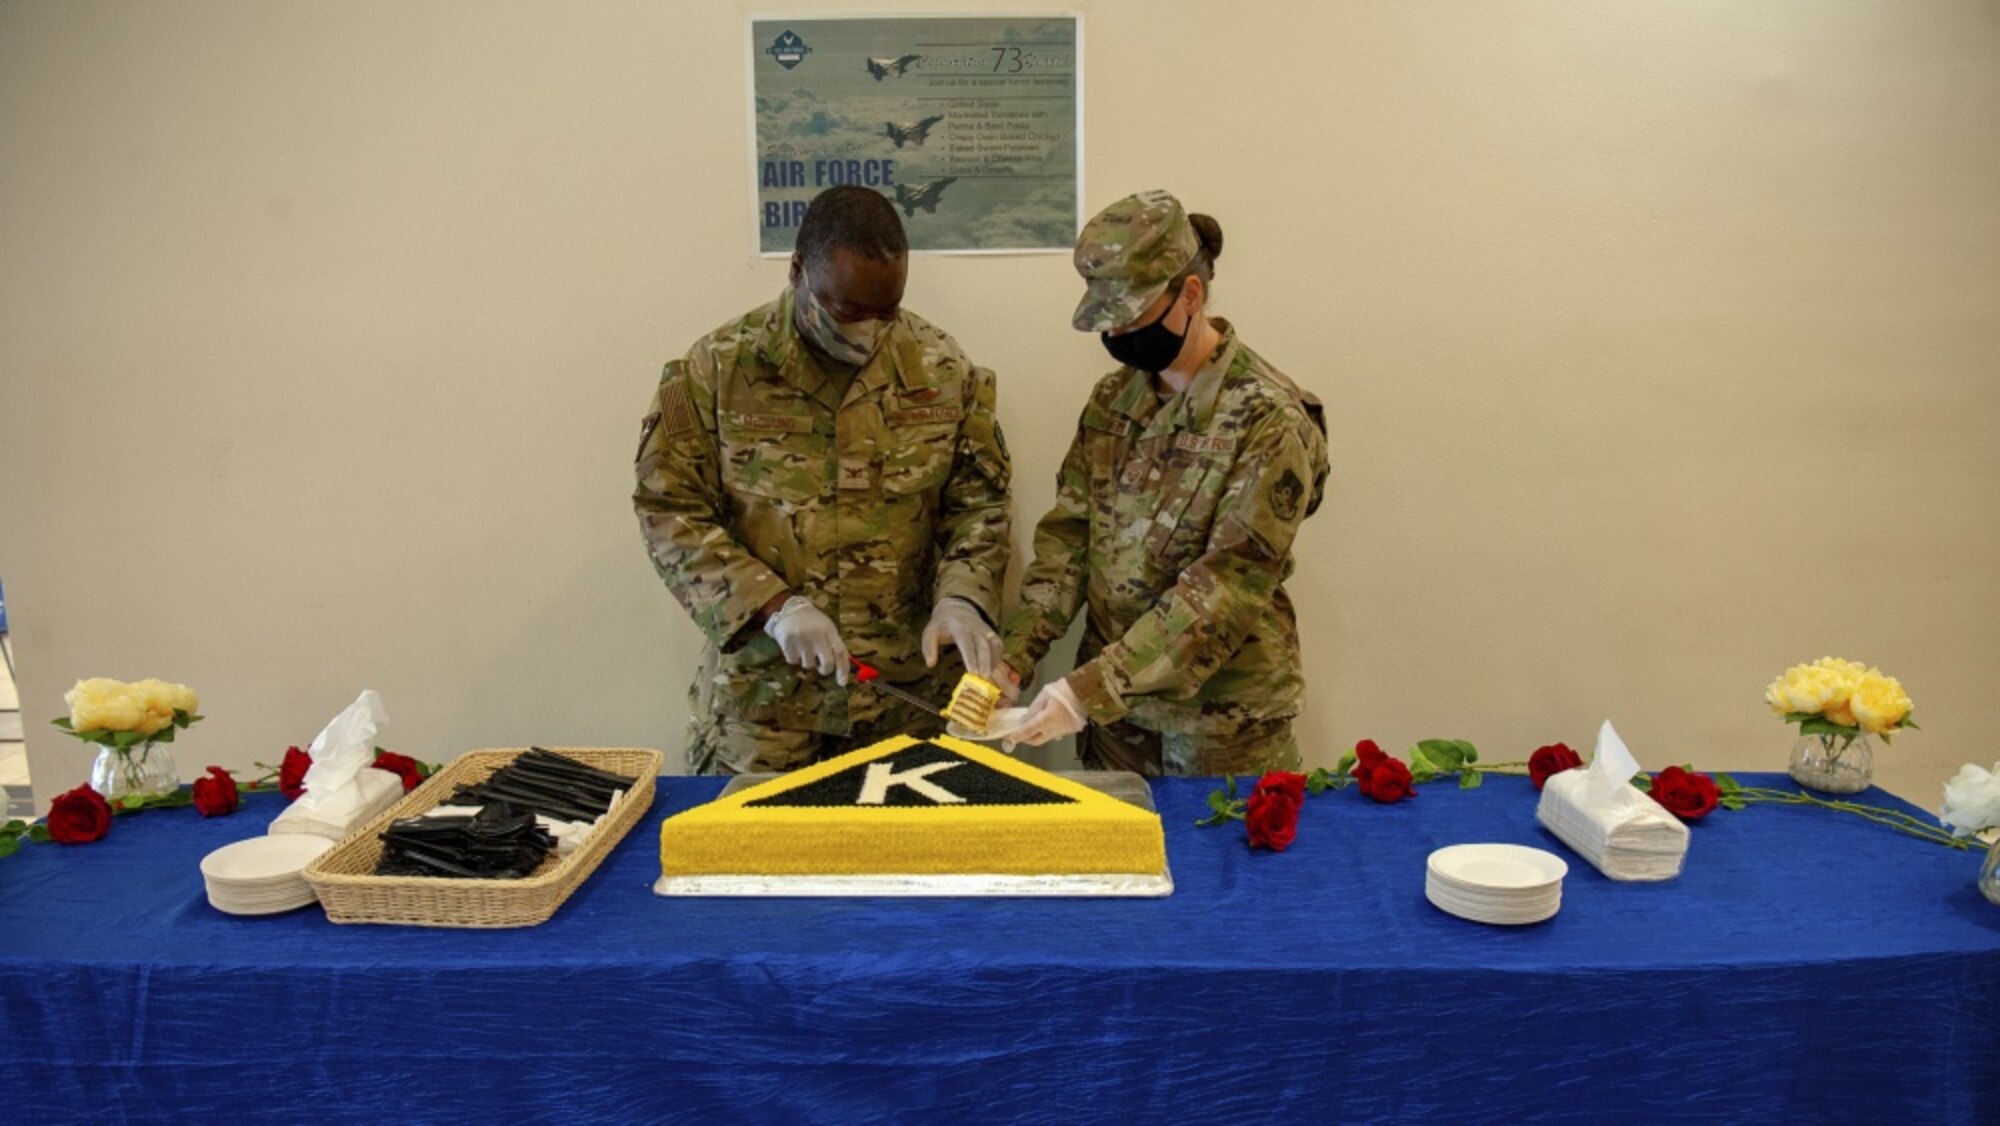 U.S. Air Force Col. Miles McClung, the 379th Air Expeditionary Wing vice commander, cuts into a special-made Triangle K cake, a nod the Wing's heritage, on Sept. 18, 2020, at Al Udeid Air Base, Qatar. AUAB personnel enjoyed a wide variety of COVID-compliant activities to help them connect and celebrate the Air Force's 73rd birthday. (U.S. Air Force photo by Staff Sgt. Heather Fejerang)